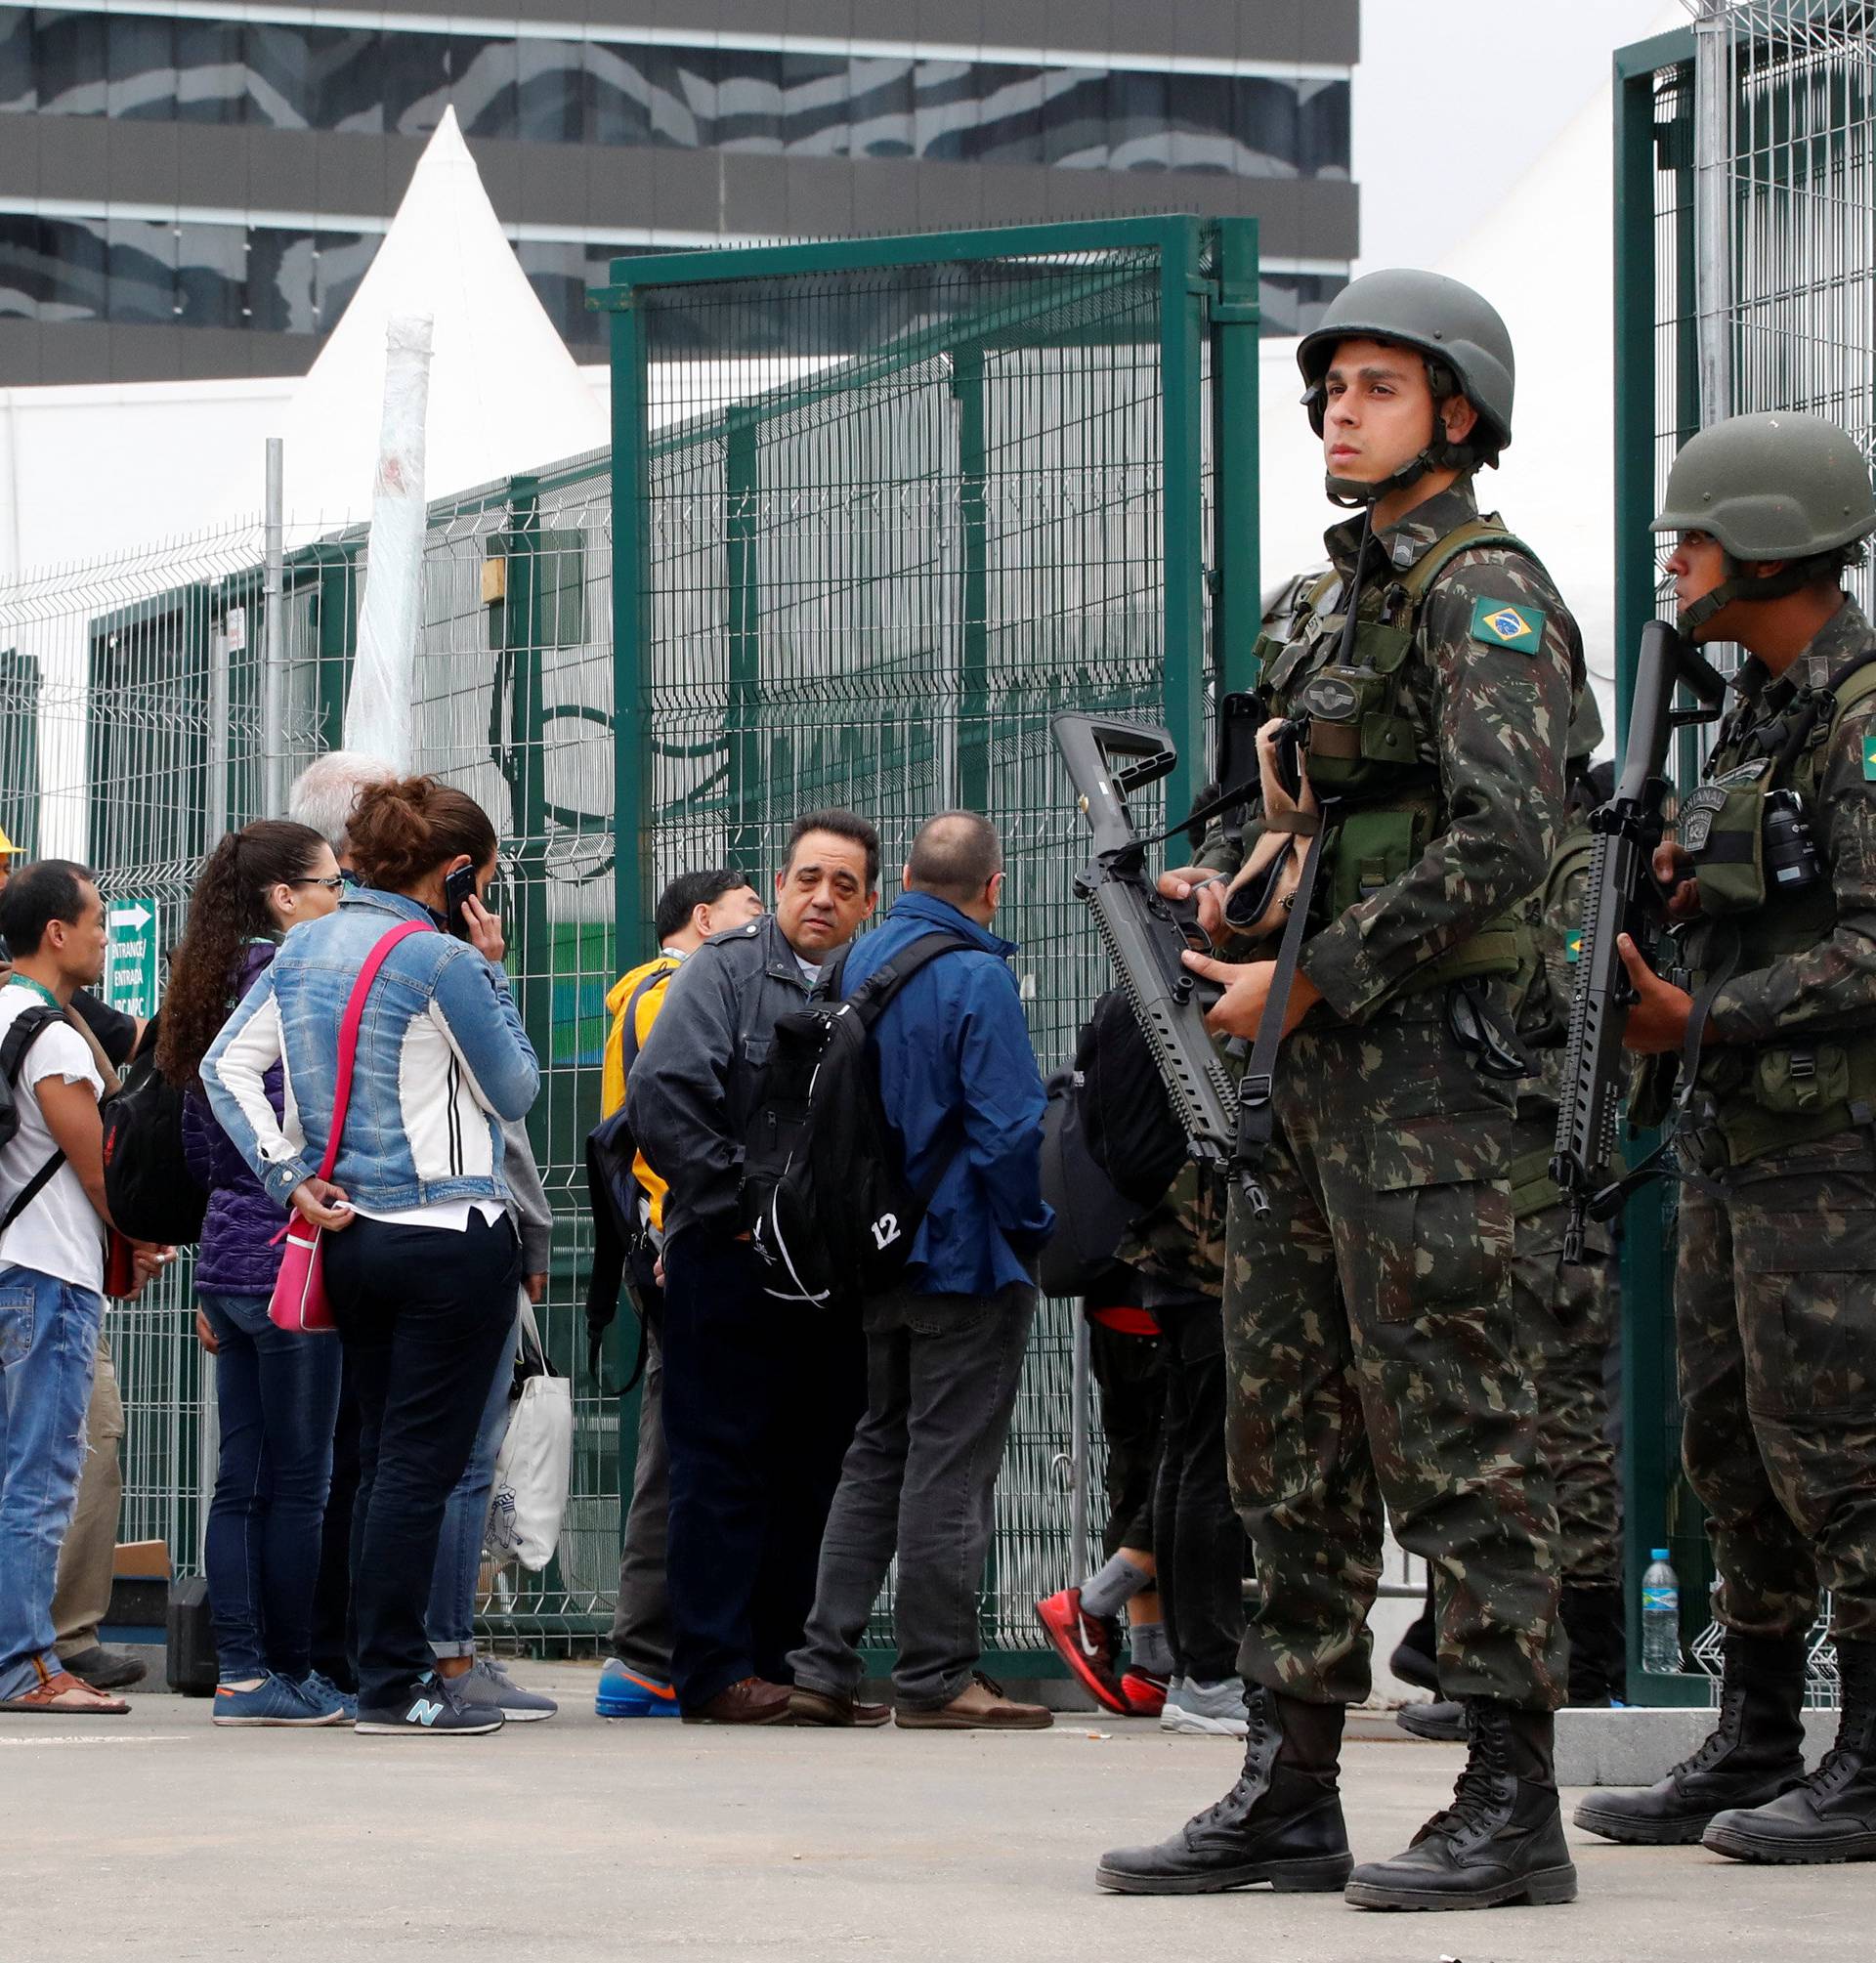 People queue at a security check to enter the main press center as Brazilian military police soldiers provide security at the 2016 Rio Olympics Park in Rio de Janeiro